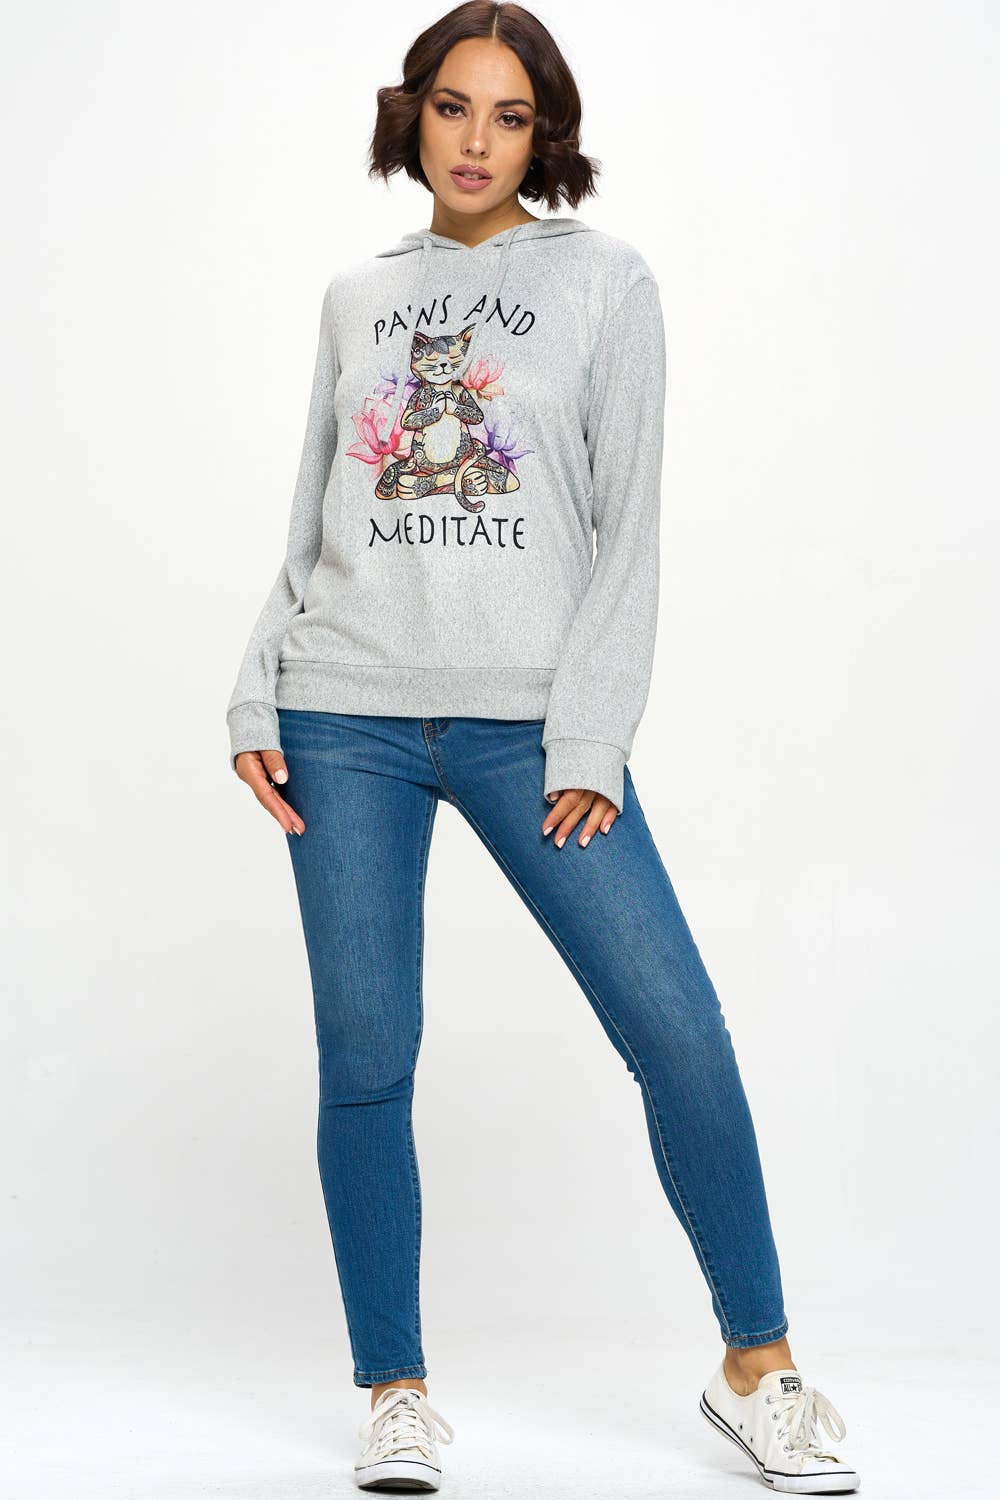 Paws and Meditate Print Hoodie with Pocket